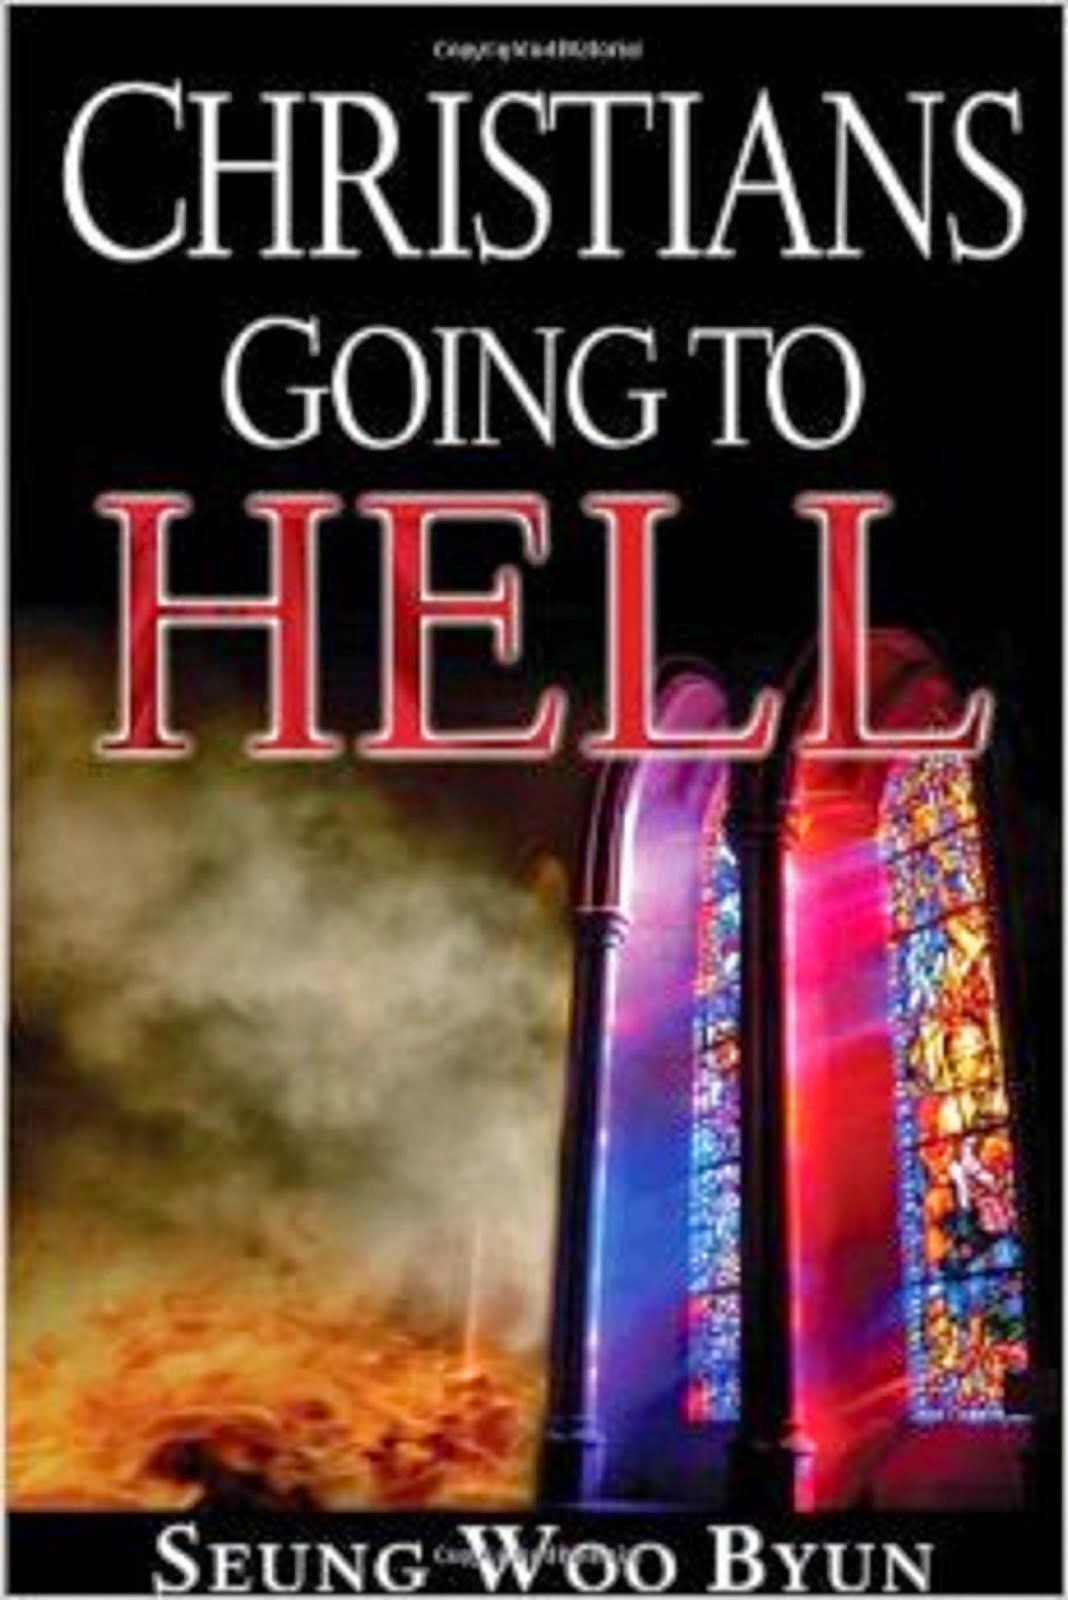 CHRISTIANS GOING TO HELL